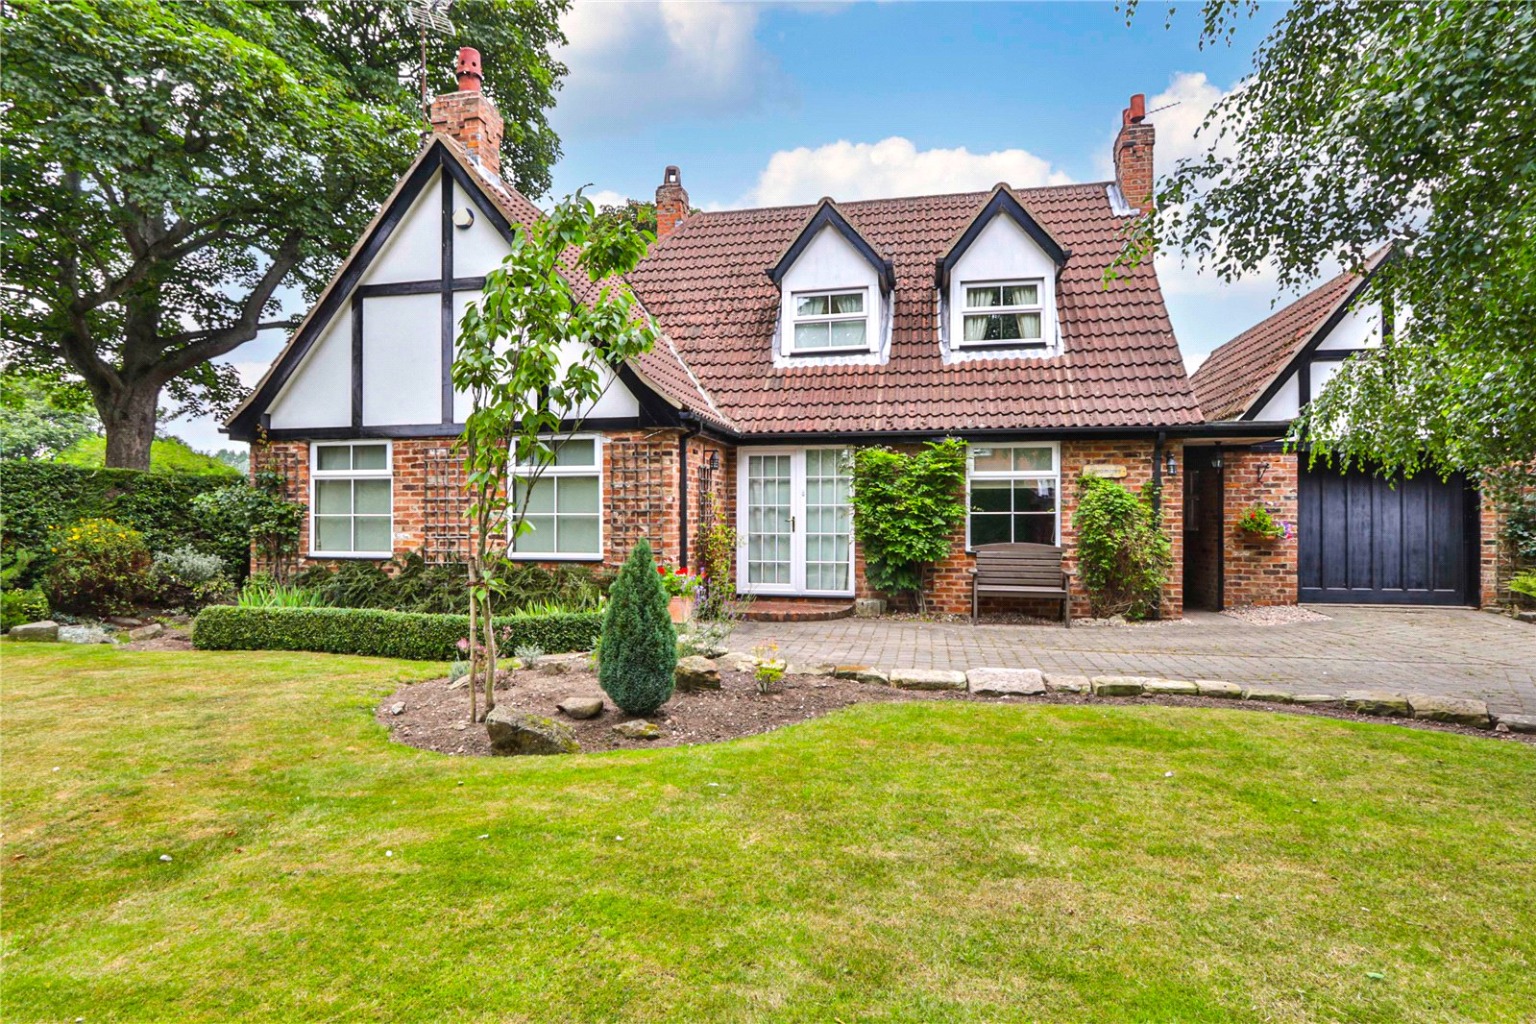 4 bed detached house for sale in Baxtergate, Hedon  - Property Image 2